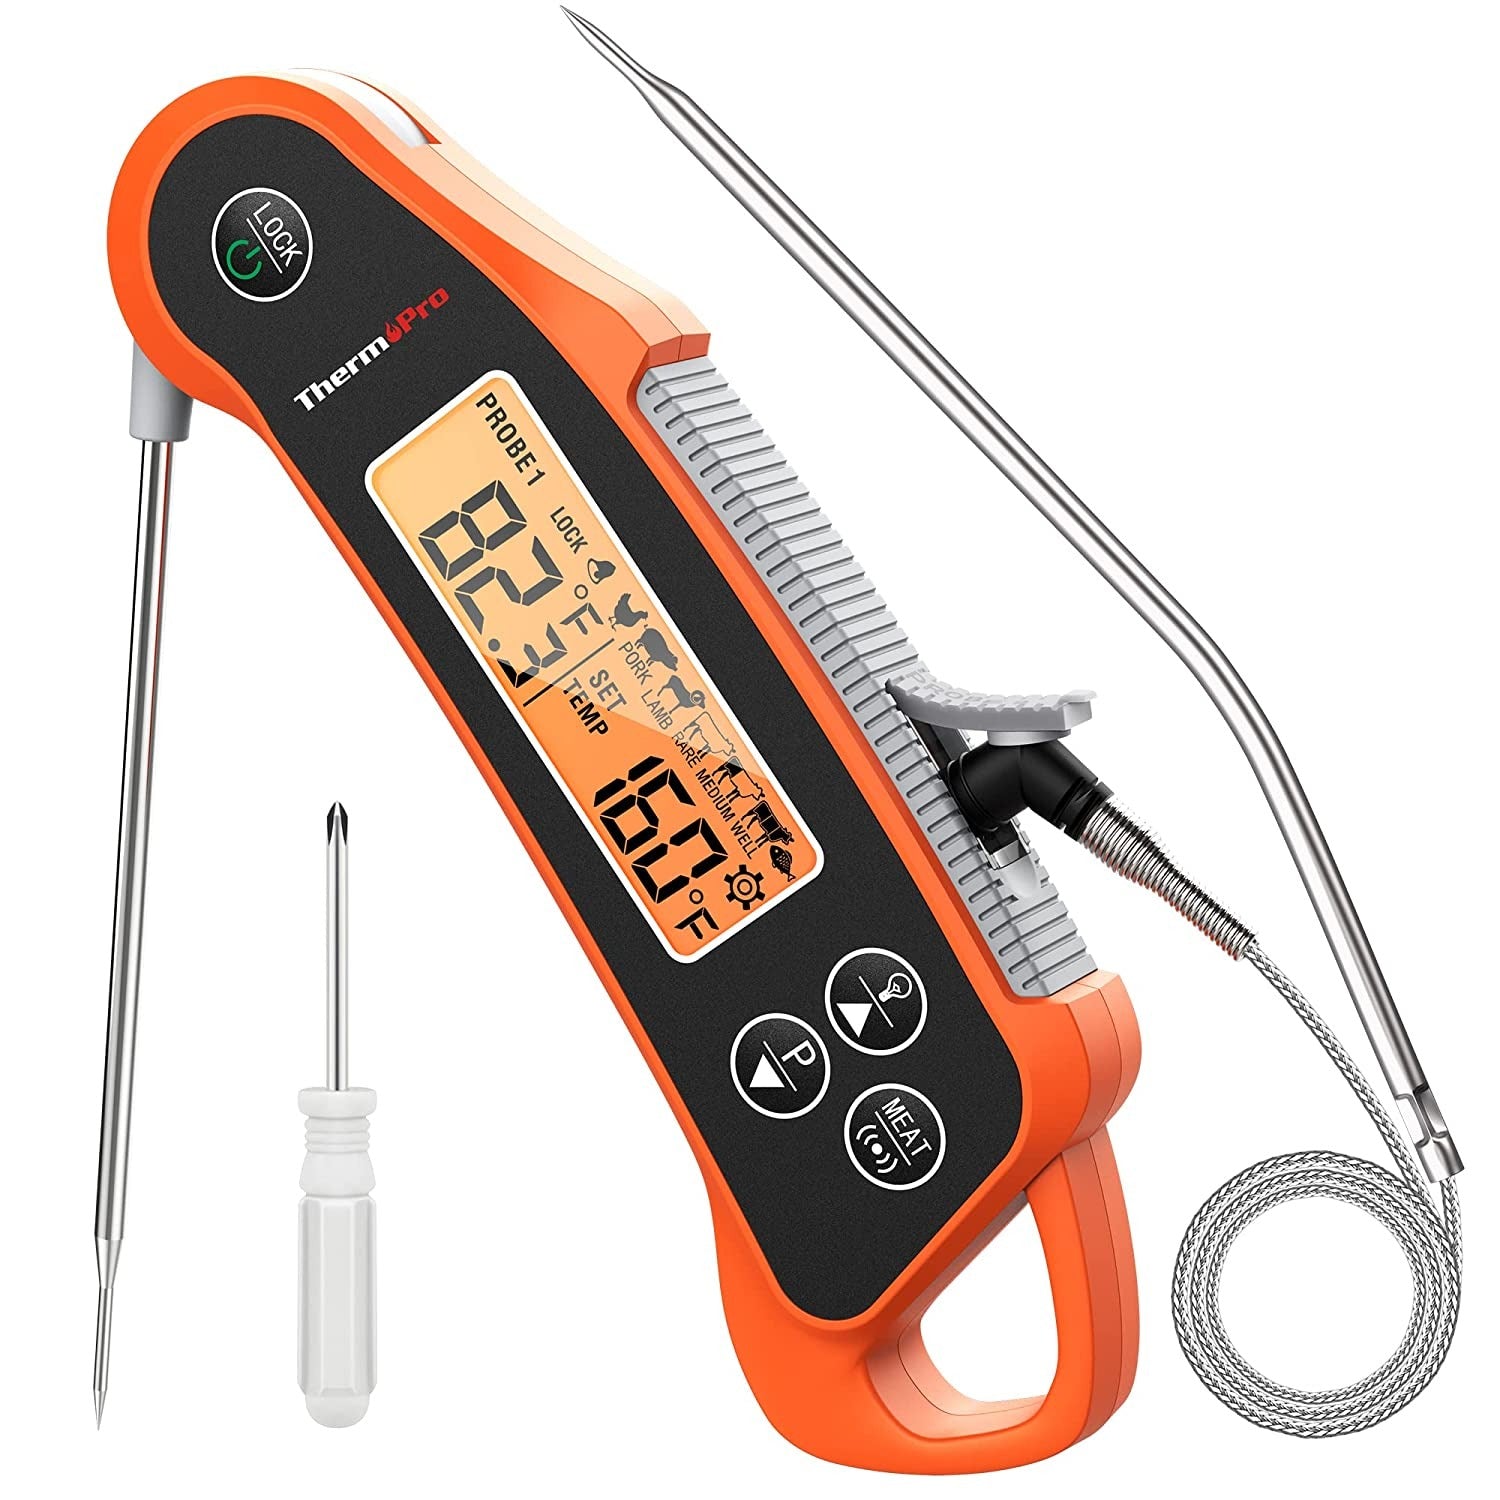 Thermopro Tp810w Wireless Meat Thermometer Of 500ft Dual Probe